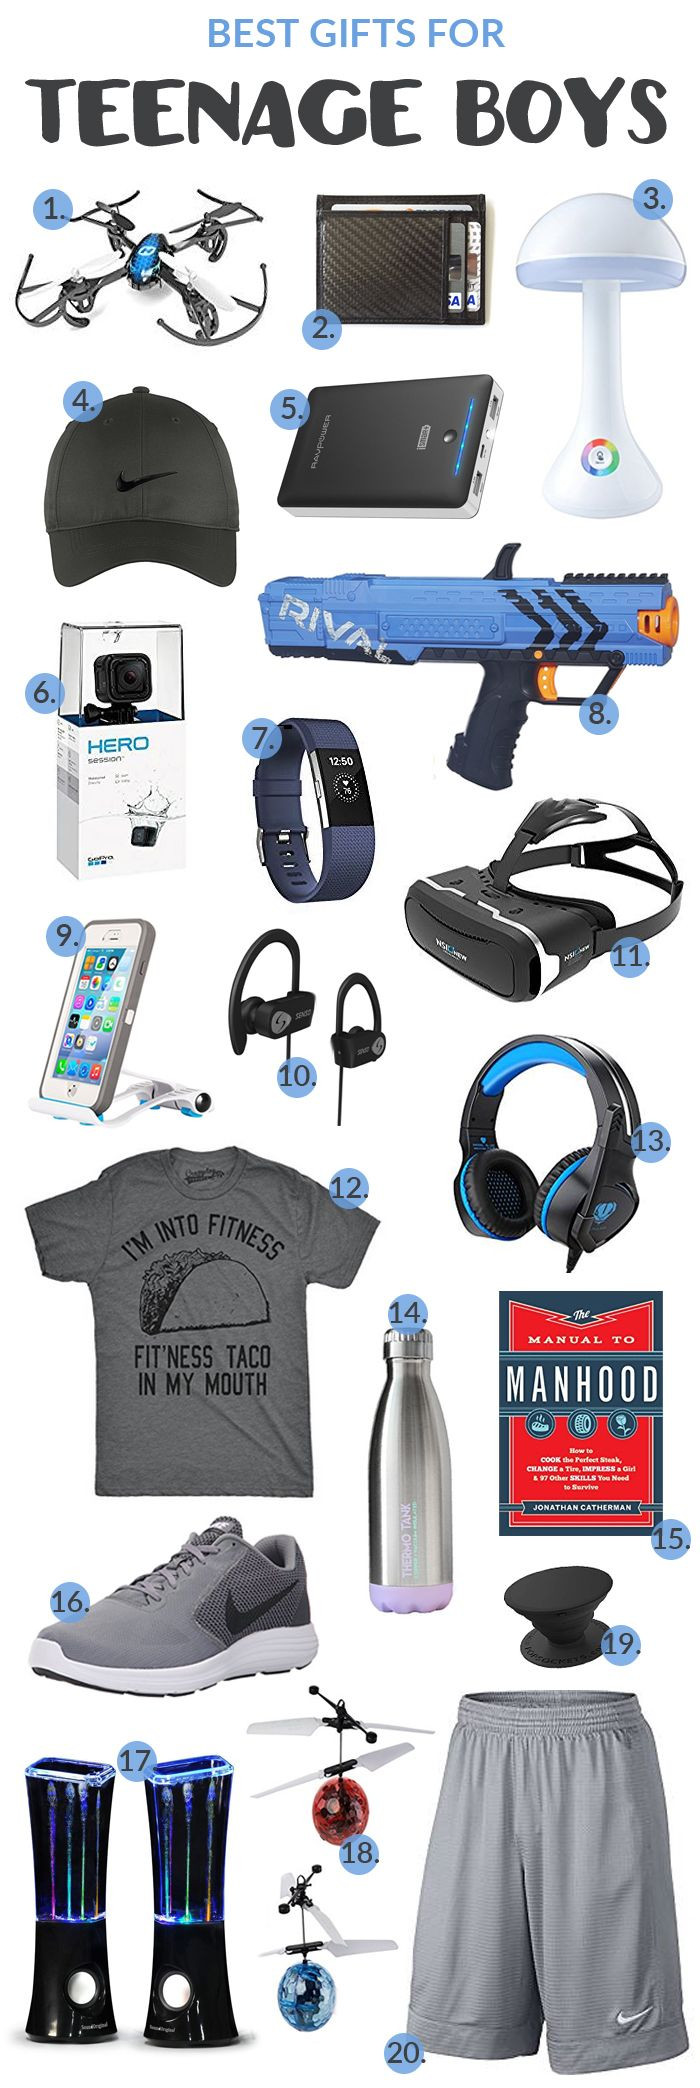 Good Gift Ideas For Boys
 Best Gifts for Teenage Boys